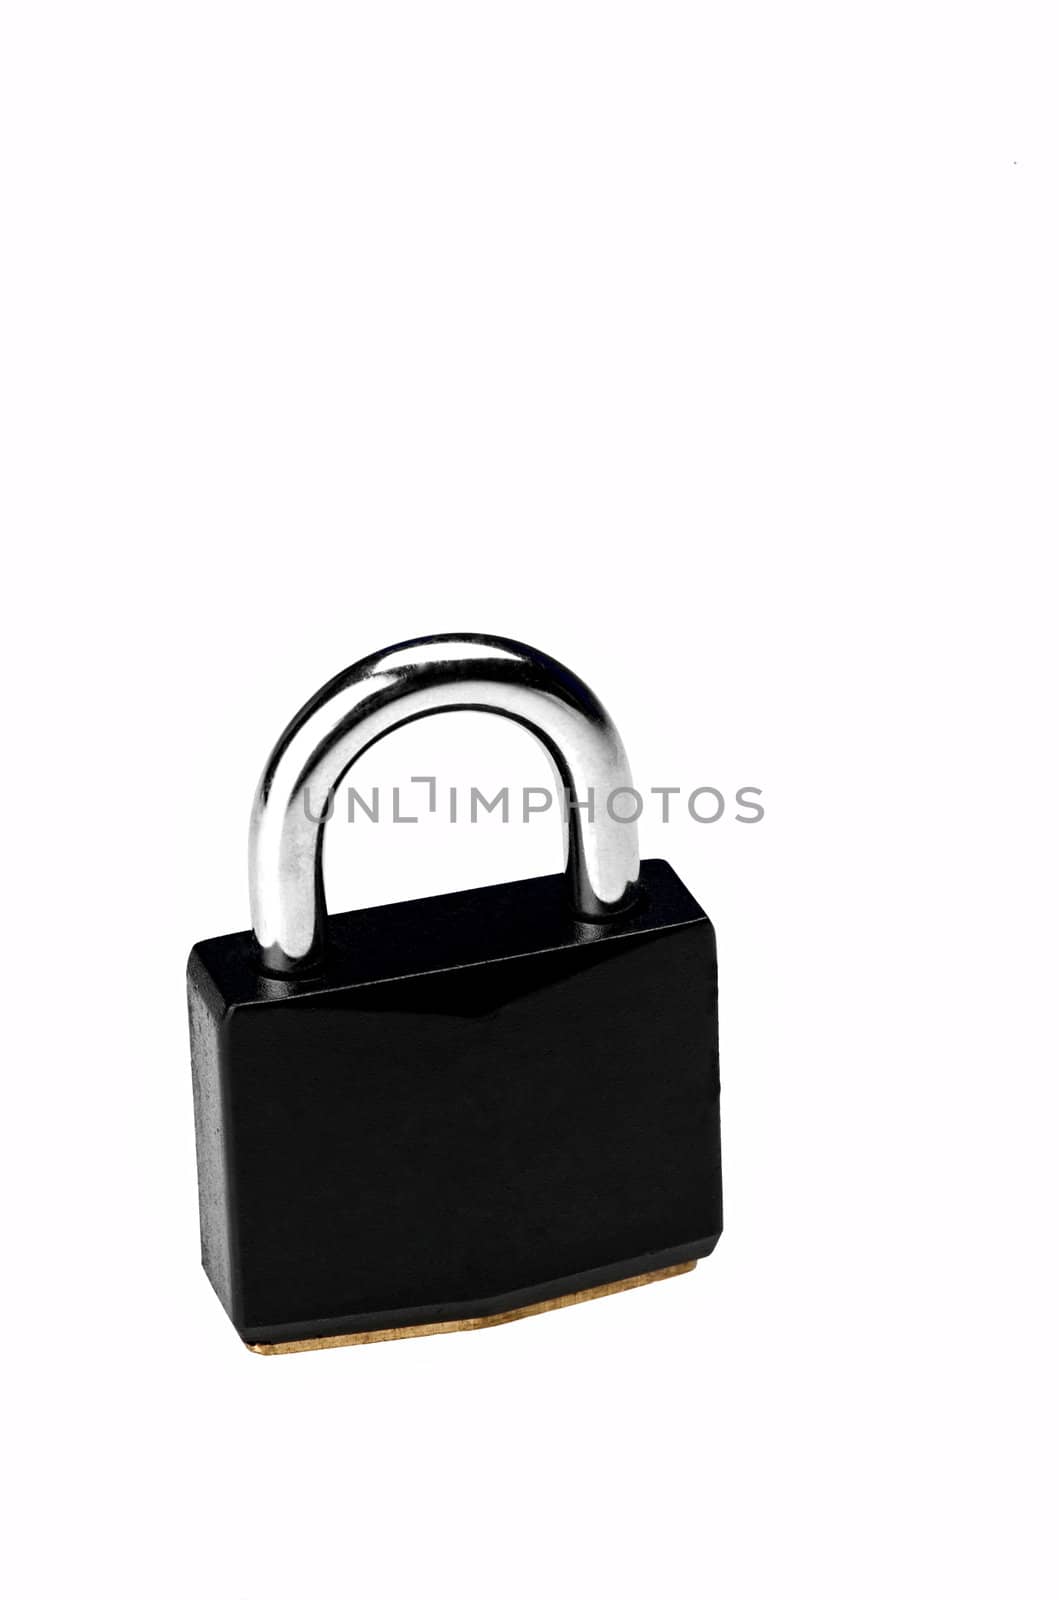 Black padlock on white background by gregory21